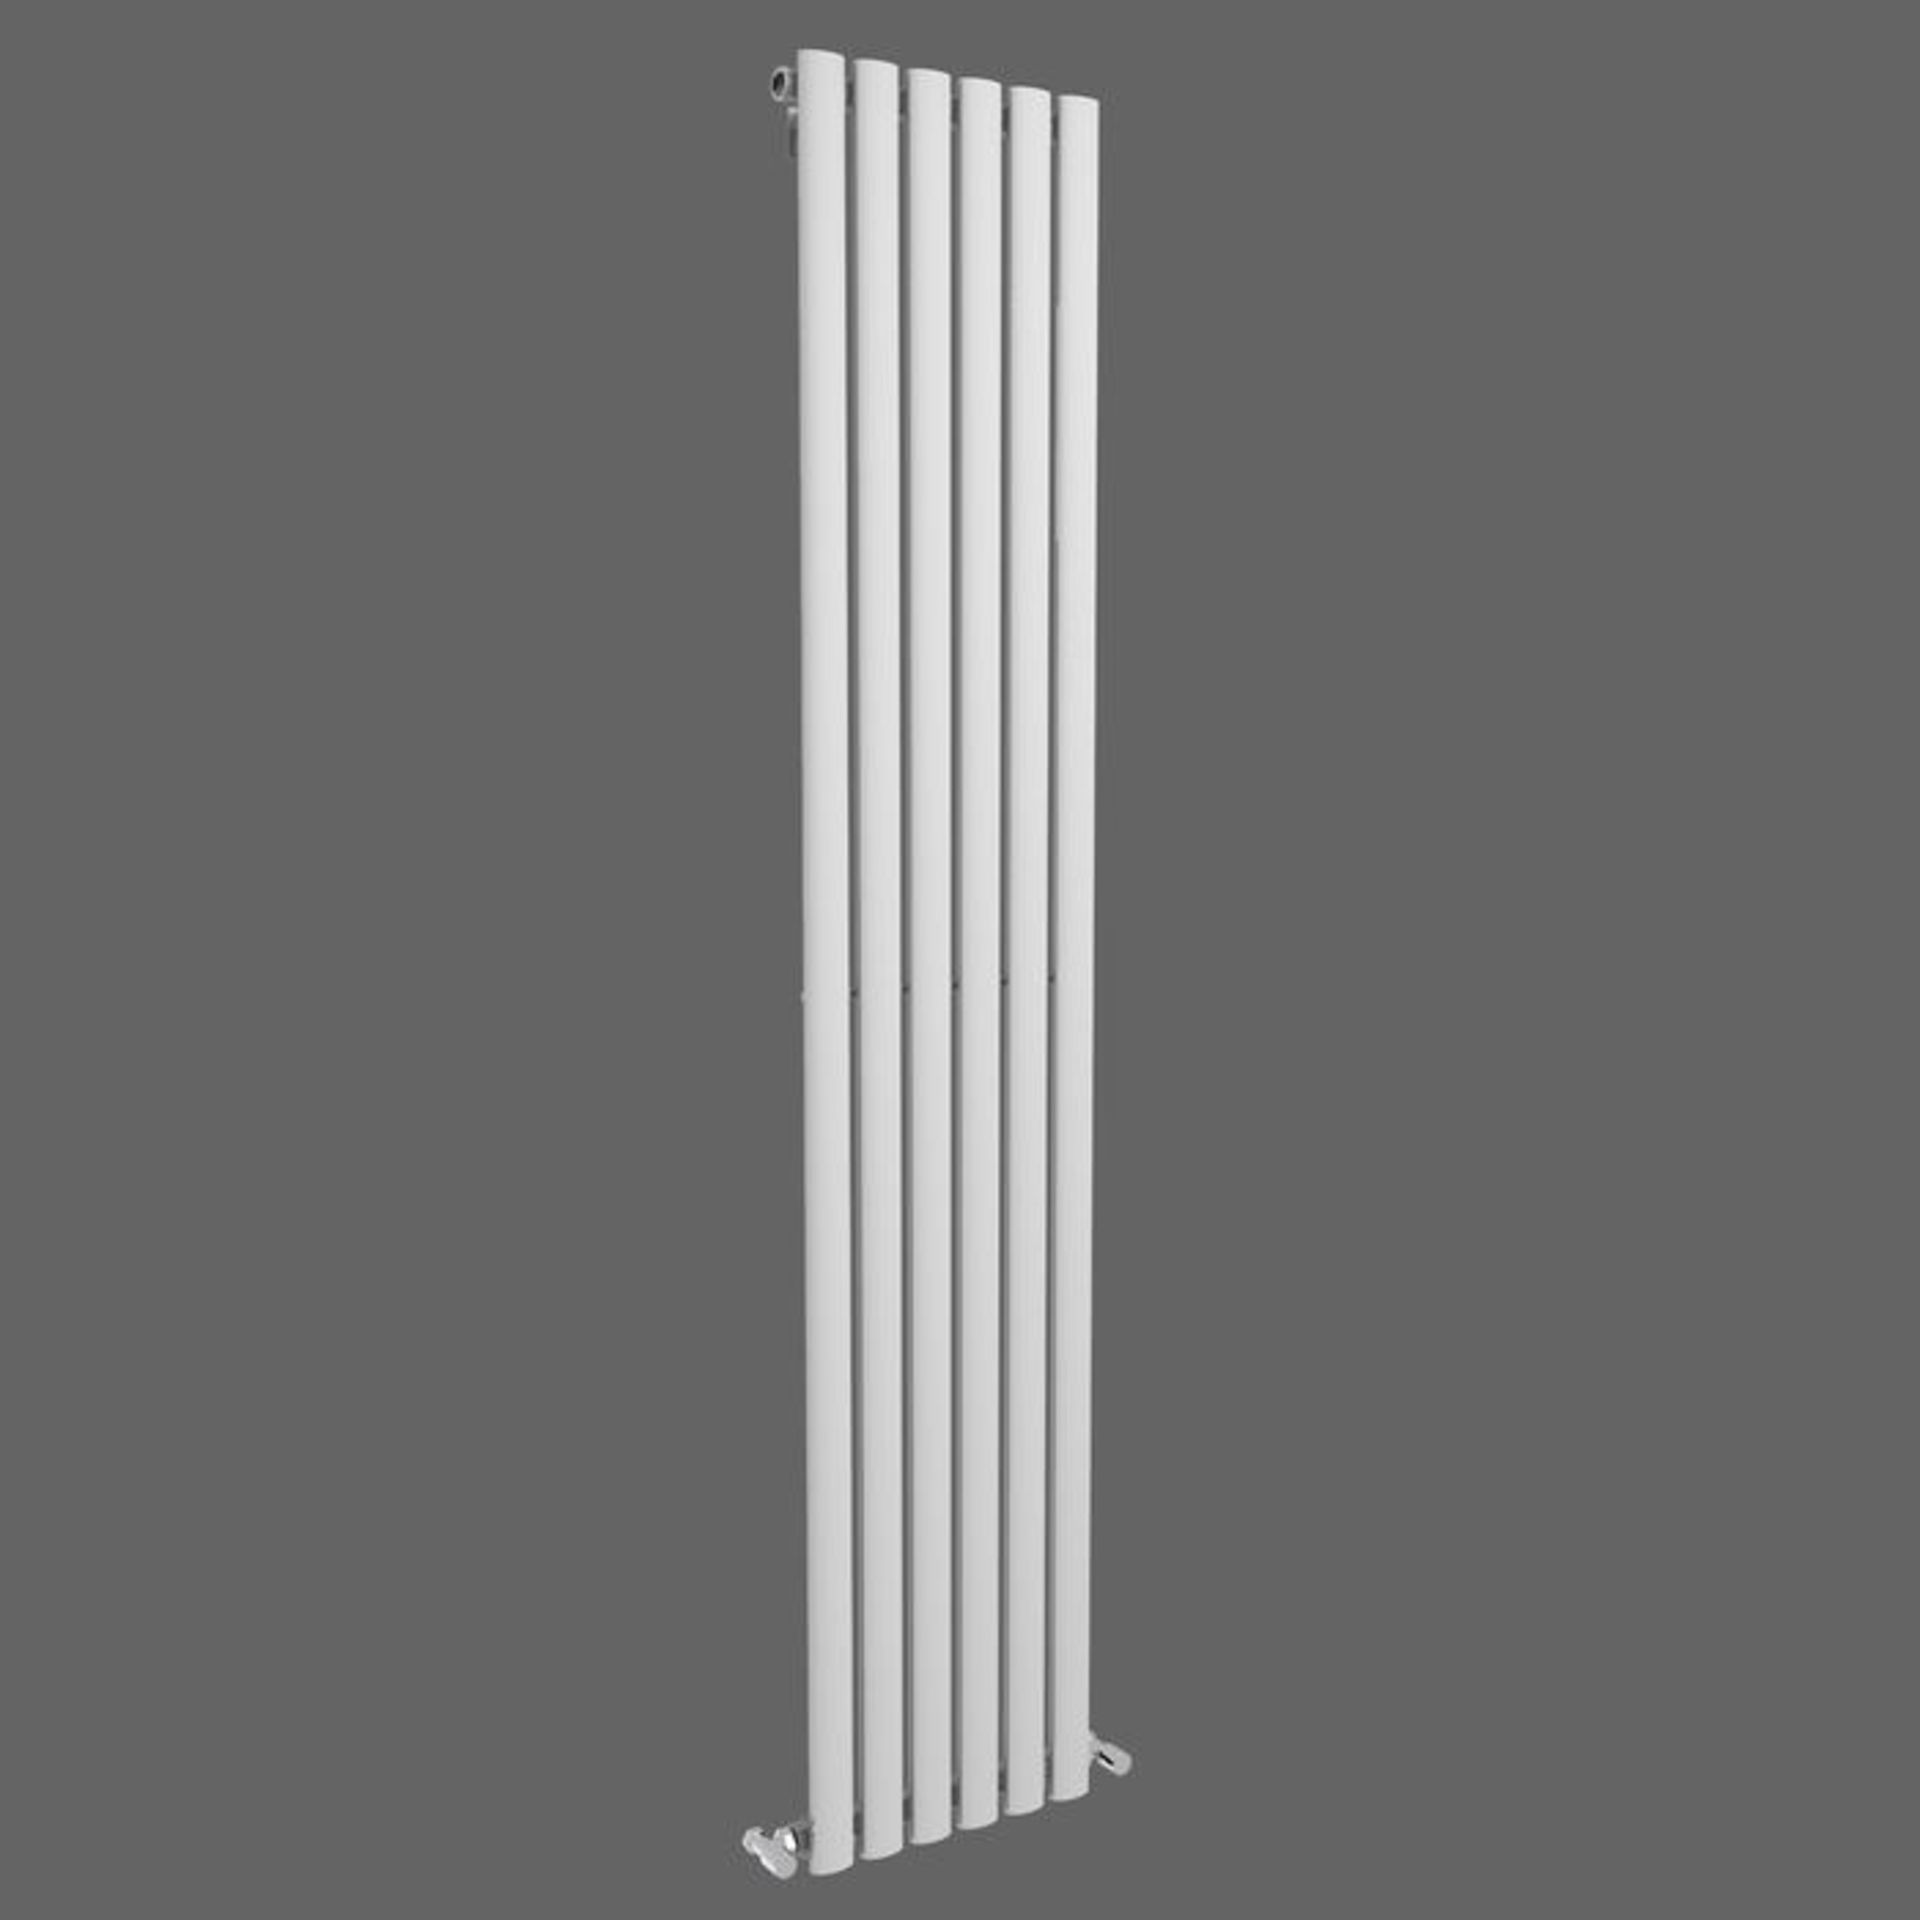 1800x360mm Gloss White Single Oval Tube Vertical Radiator. RRP £256.99.Made from high quality... - Image 3 of 3